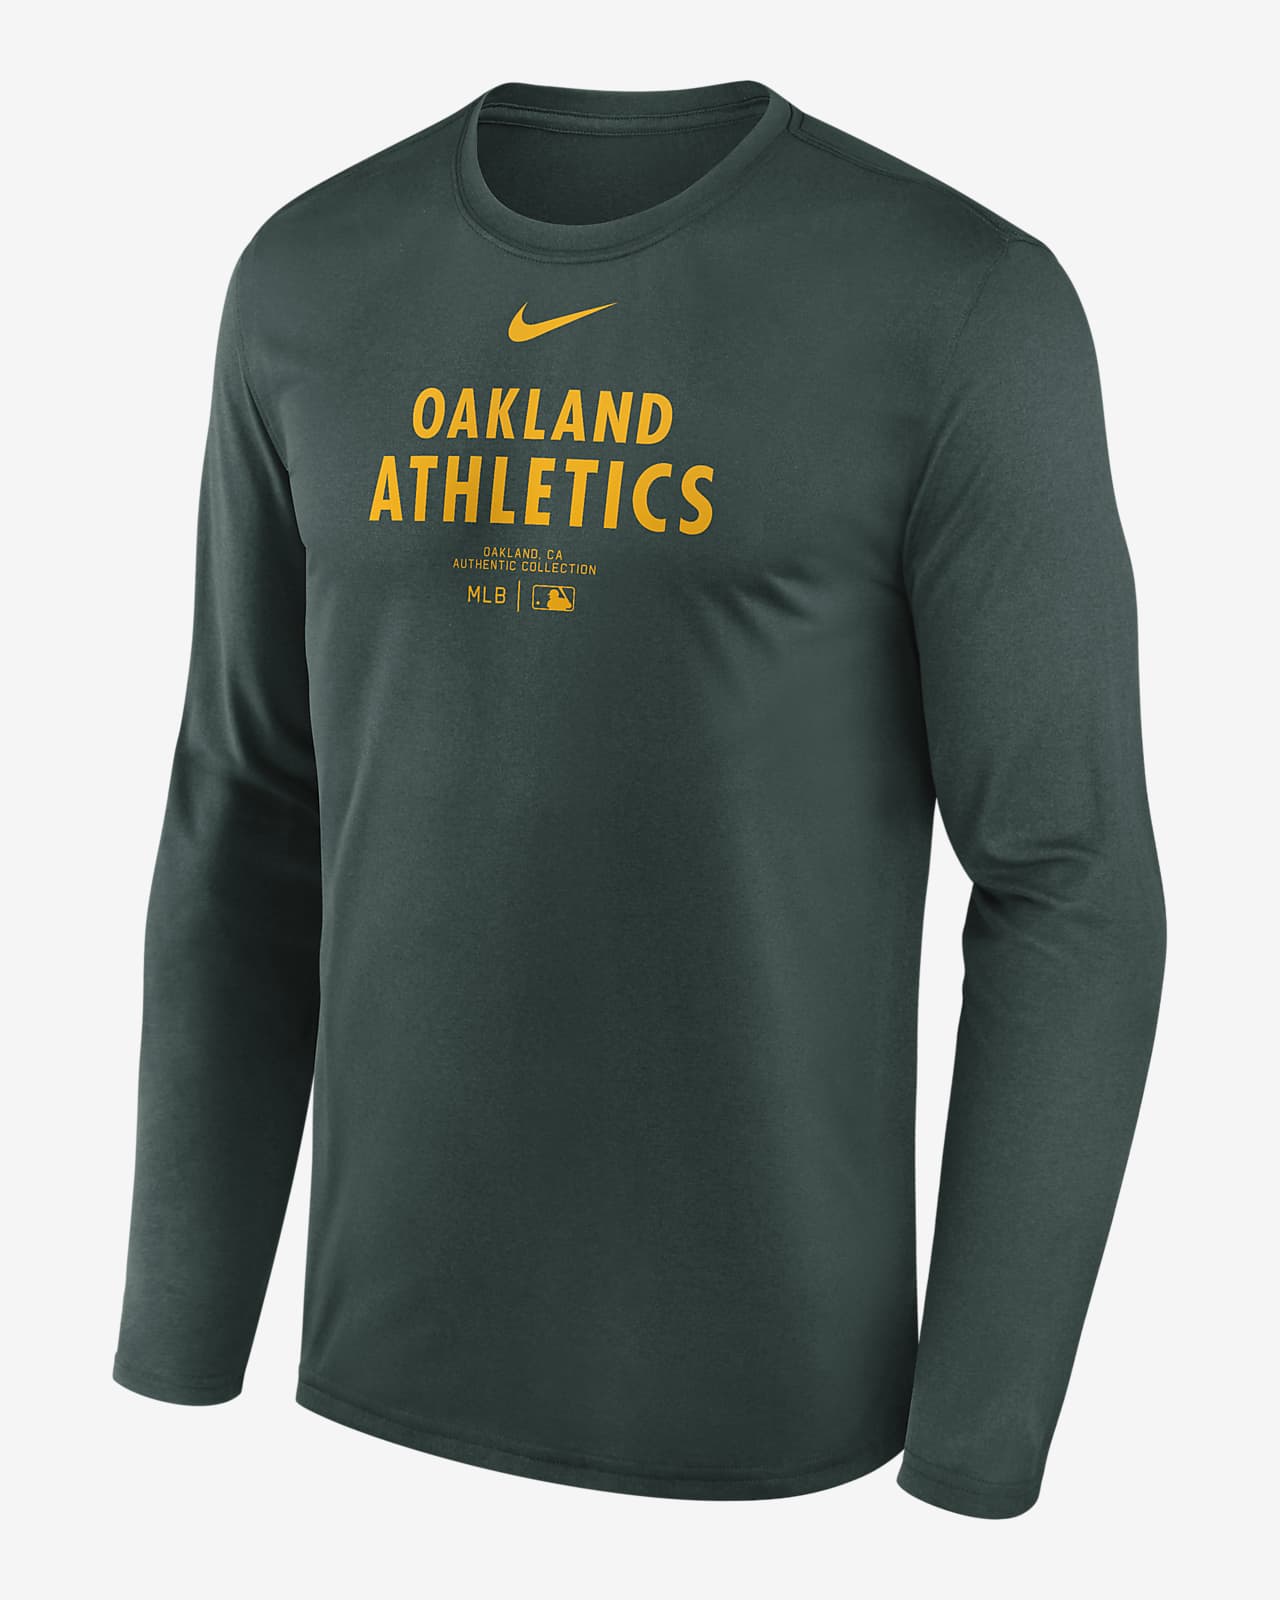 Oakland Athletics Authentic Collection Practice Men's Nike Dri-FIT MLB Long-Sleeve T-Shirt